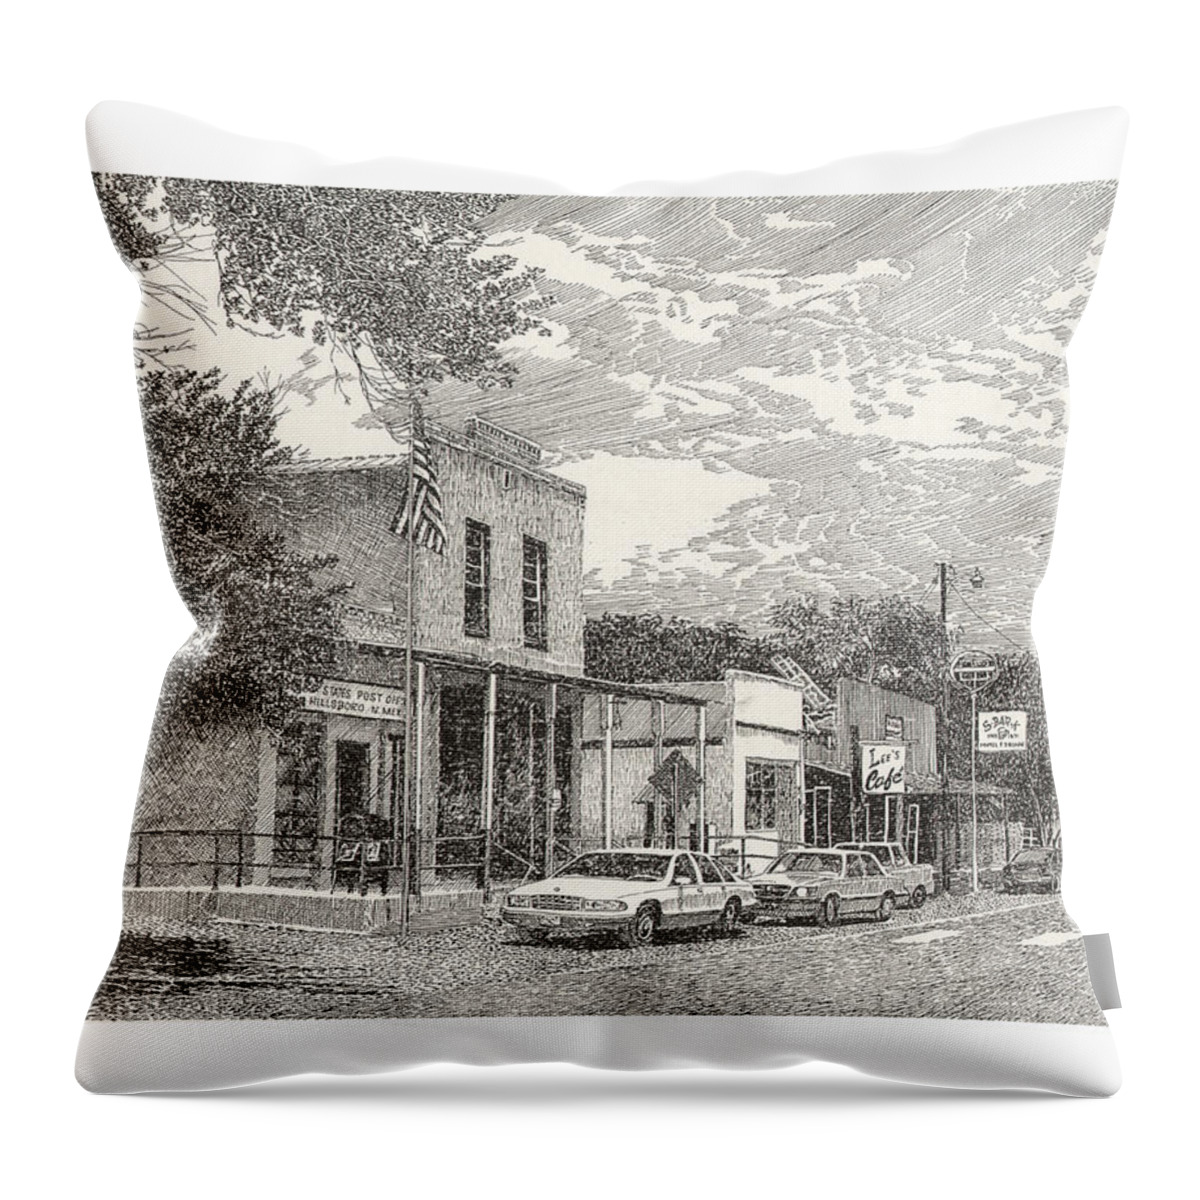 Hillsboro Nm Post Office Framed Prints And Note Cards Of Ink Drawings Of Scenic Southern New Mexico. Framed Canvas Prints Of Pen And Ink Images Of Southern New Mexico. Black And White Art Of Southern New Mexico Throw Pillow featuring the drawing Hillsboro NM Post Office by Jack Pumphrey